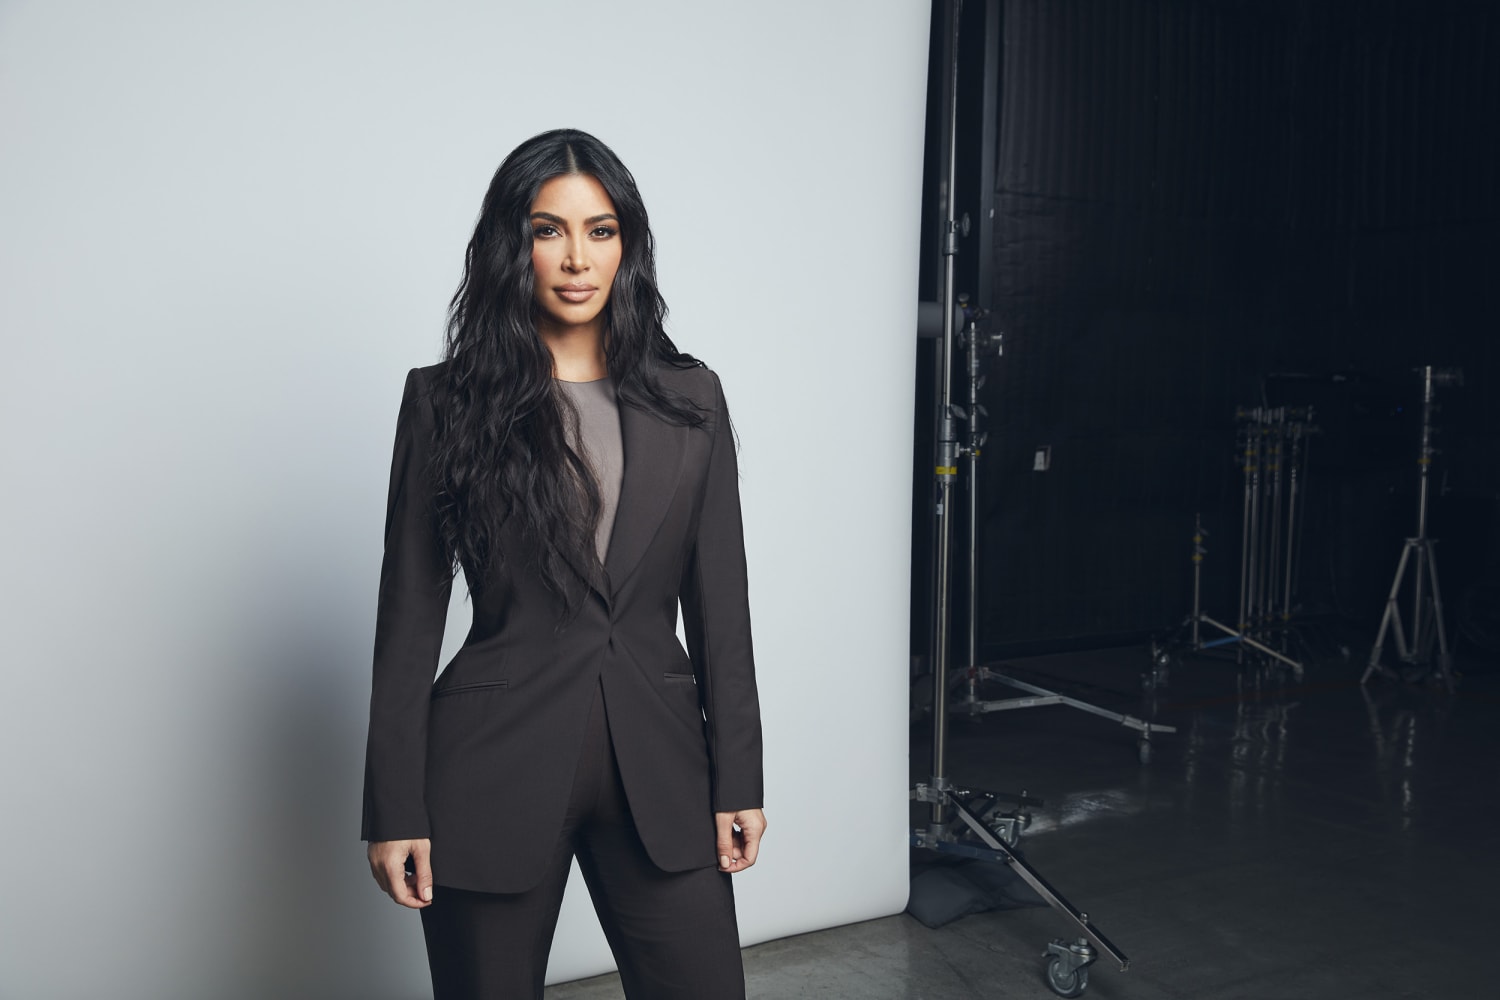 Kim Kardashian West, other celebrities to freeze Facebook and Instagram  accounts in protest